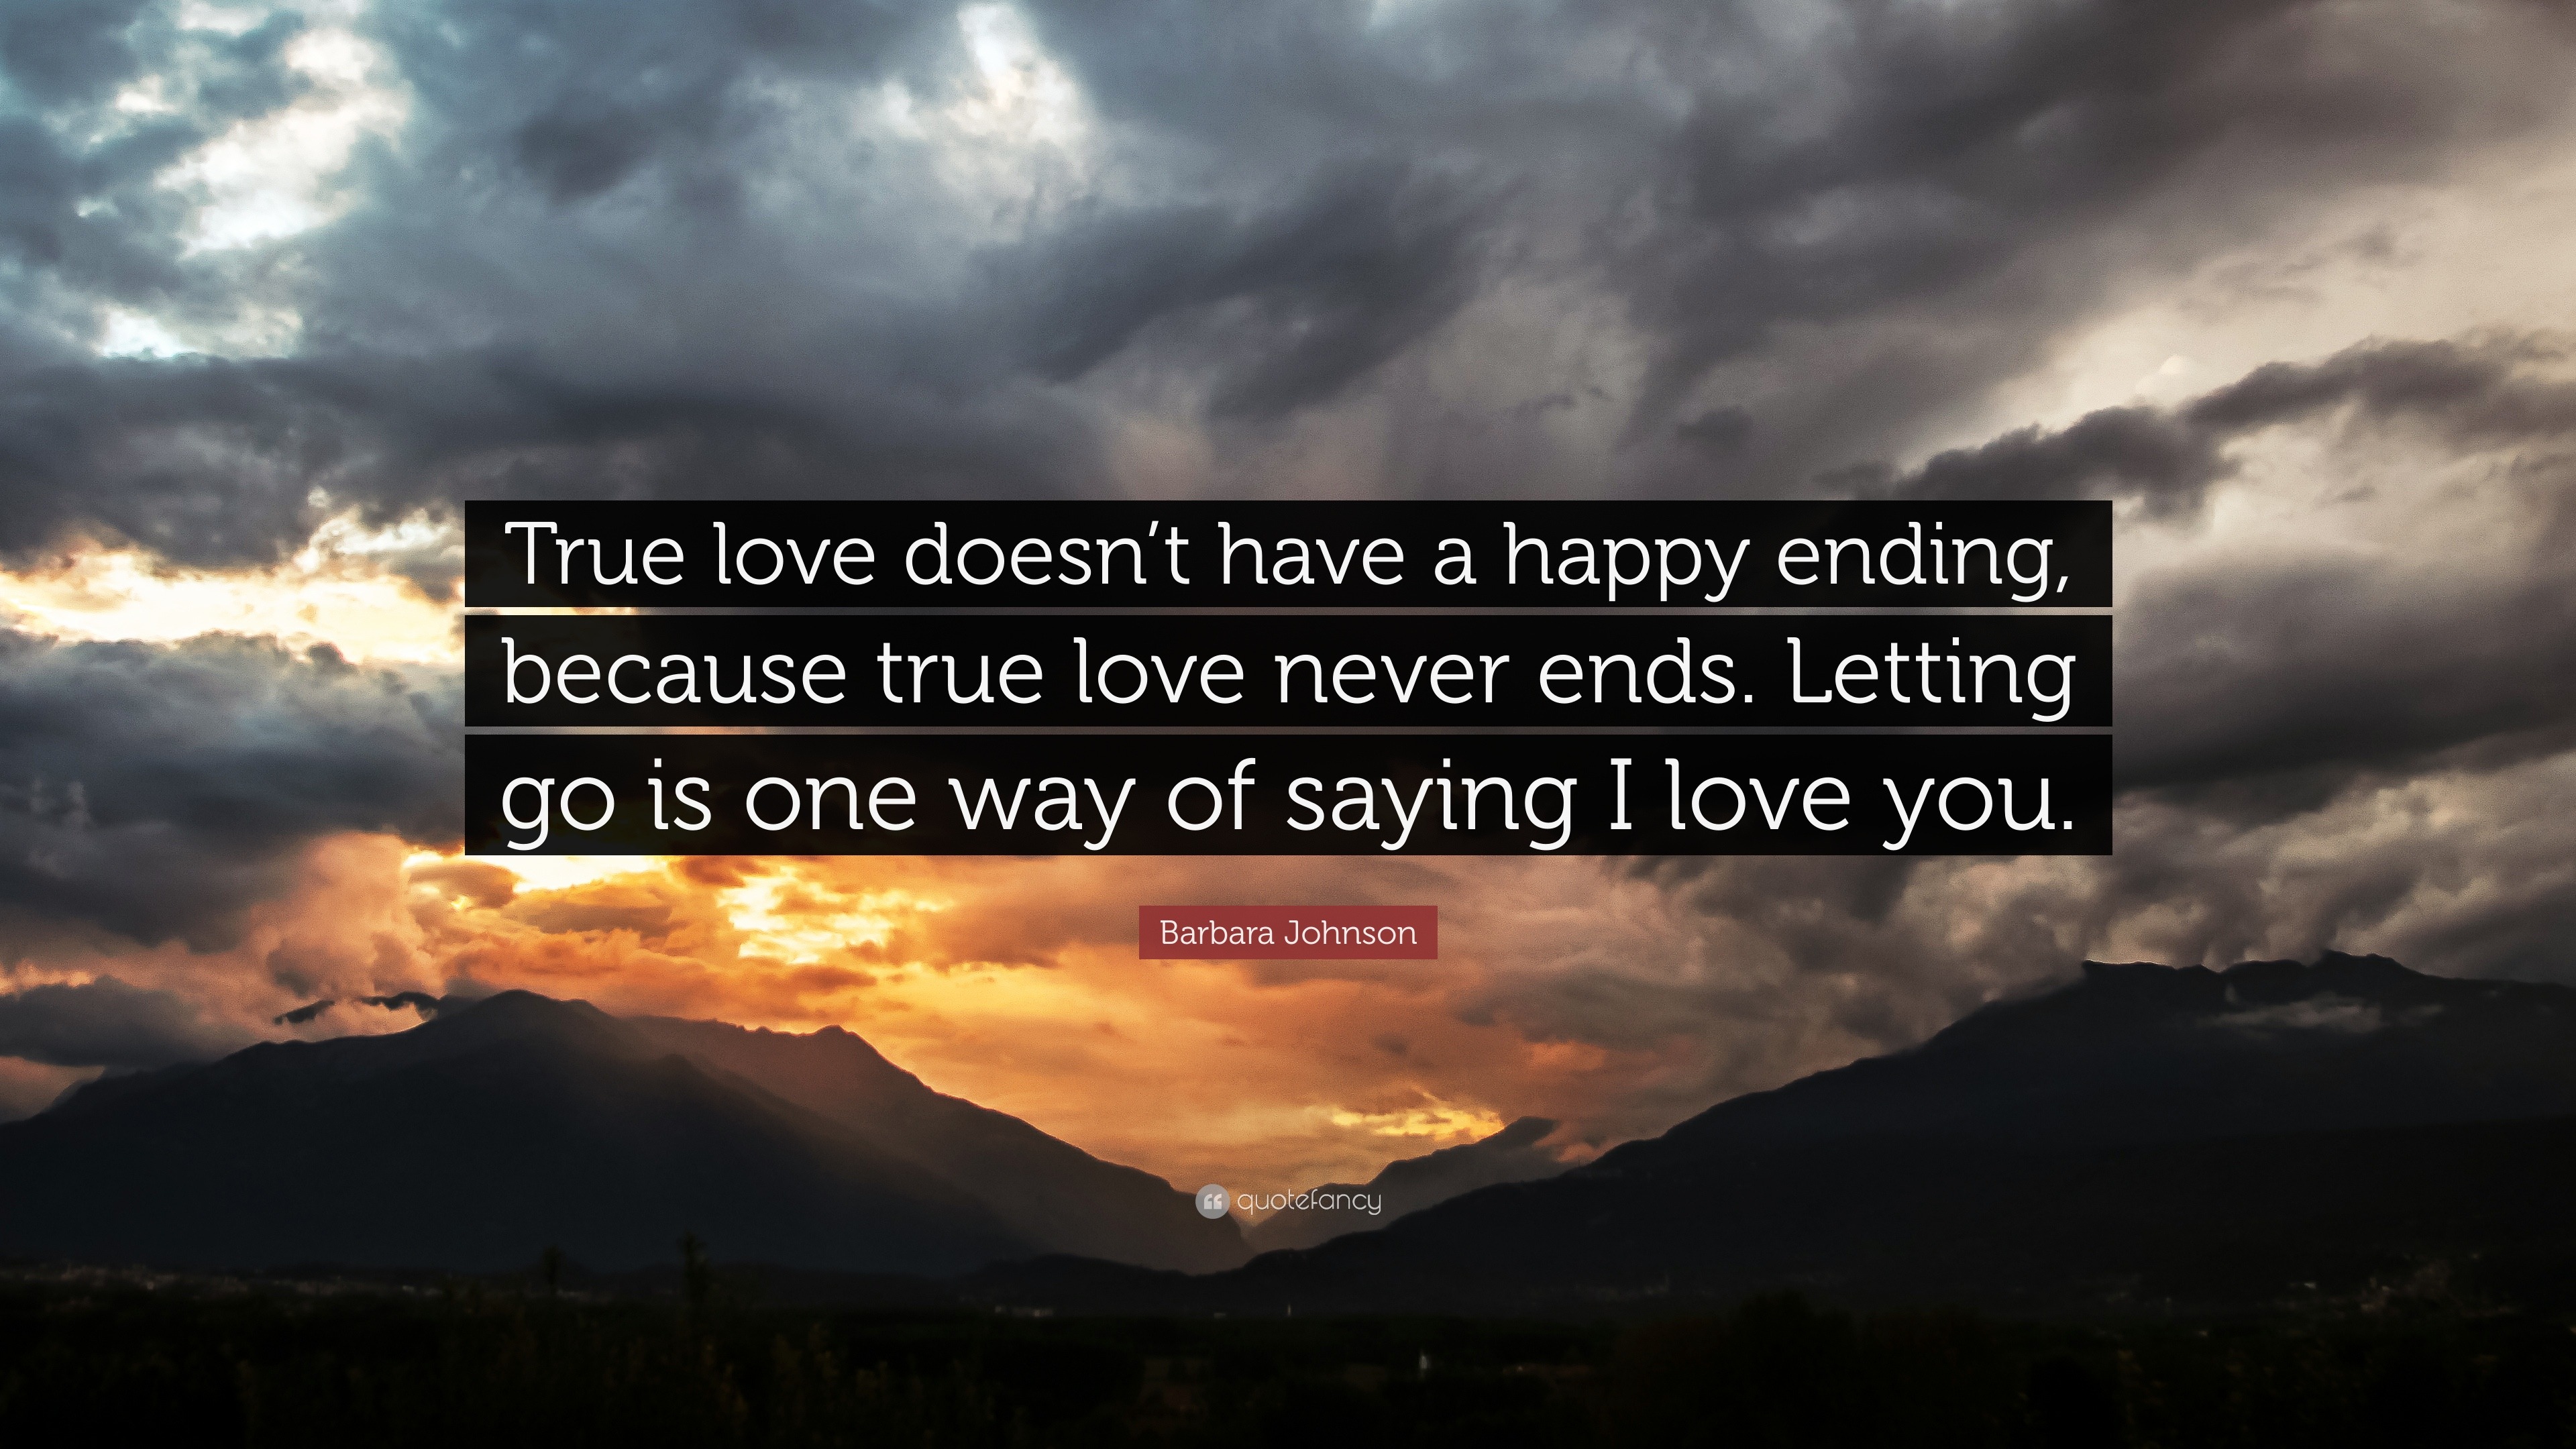 Barbara Johnson Quote: “True love doesn’t have a happy ending, because